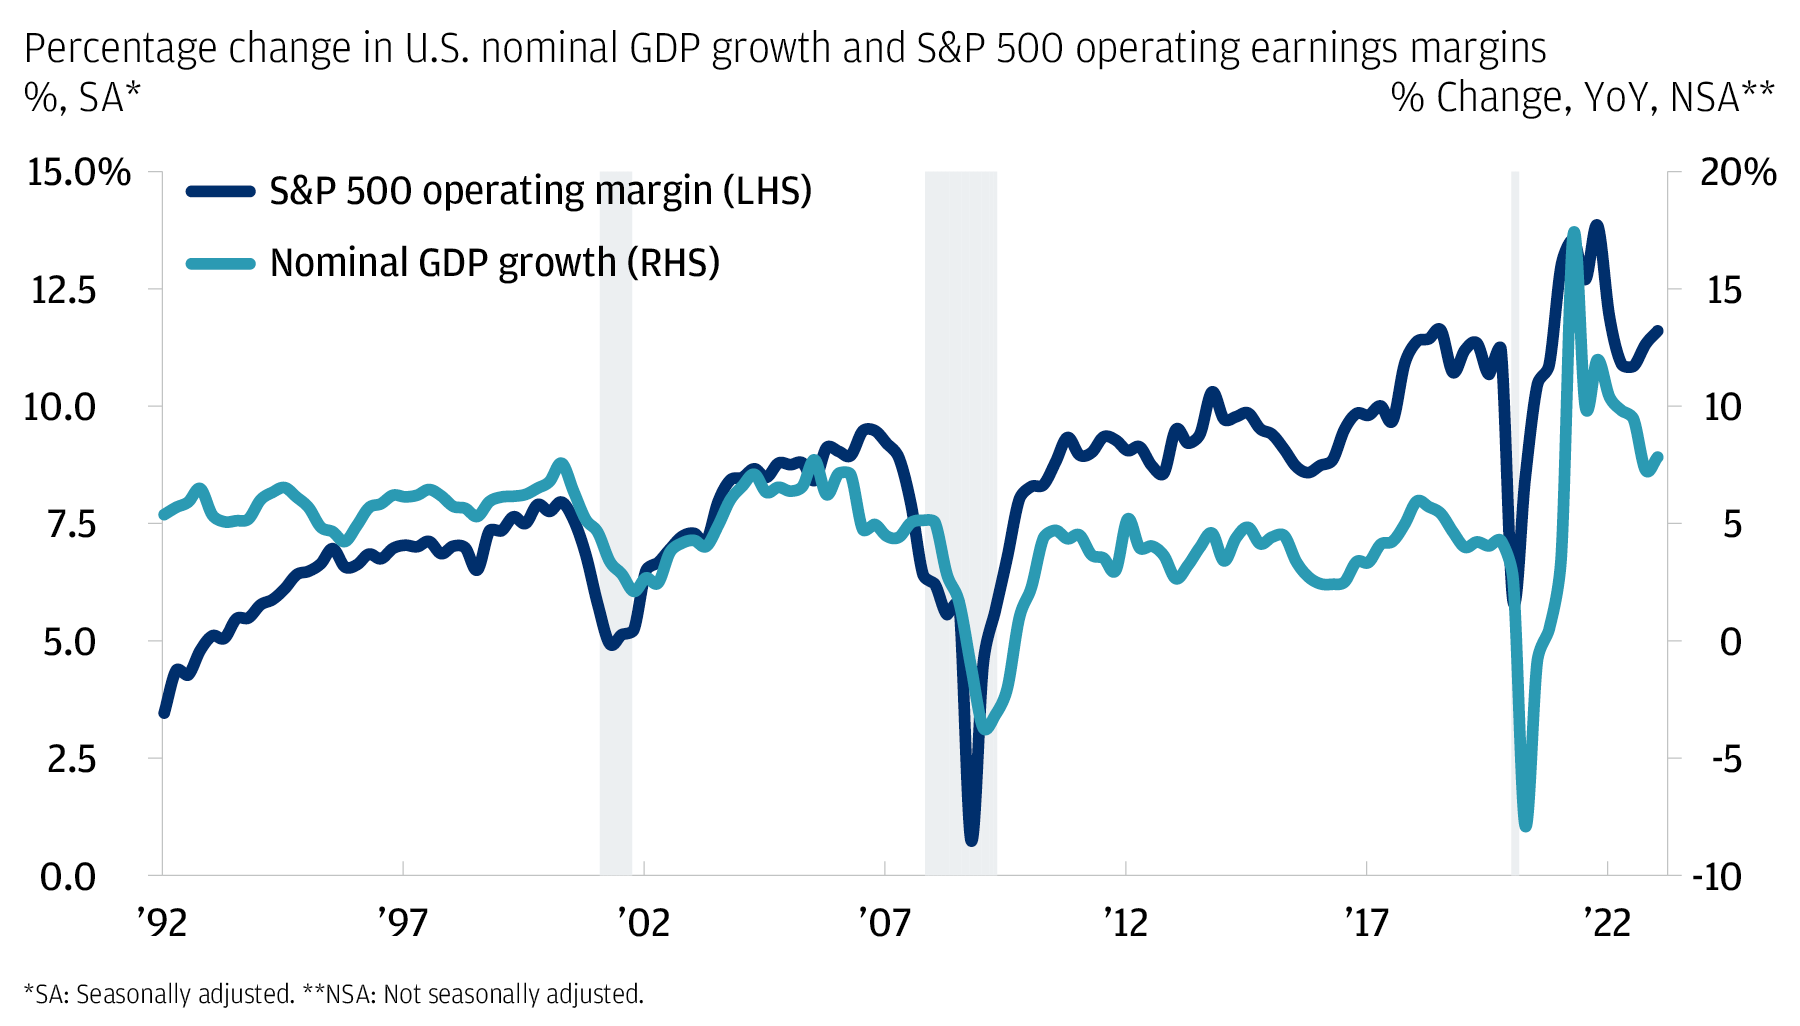 The chart describes the S&P 500 operating margin (%) versus nominal GDP growth (% Change year-over-year) from 1992 to 2023.